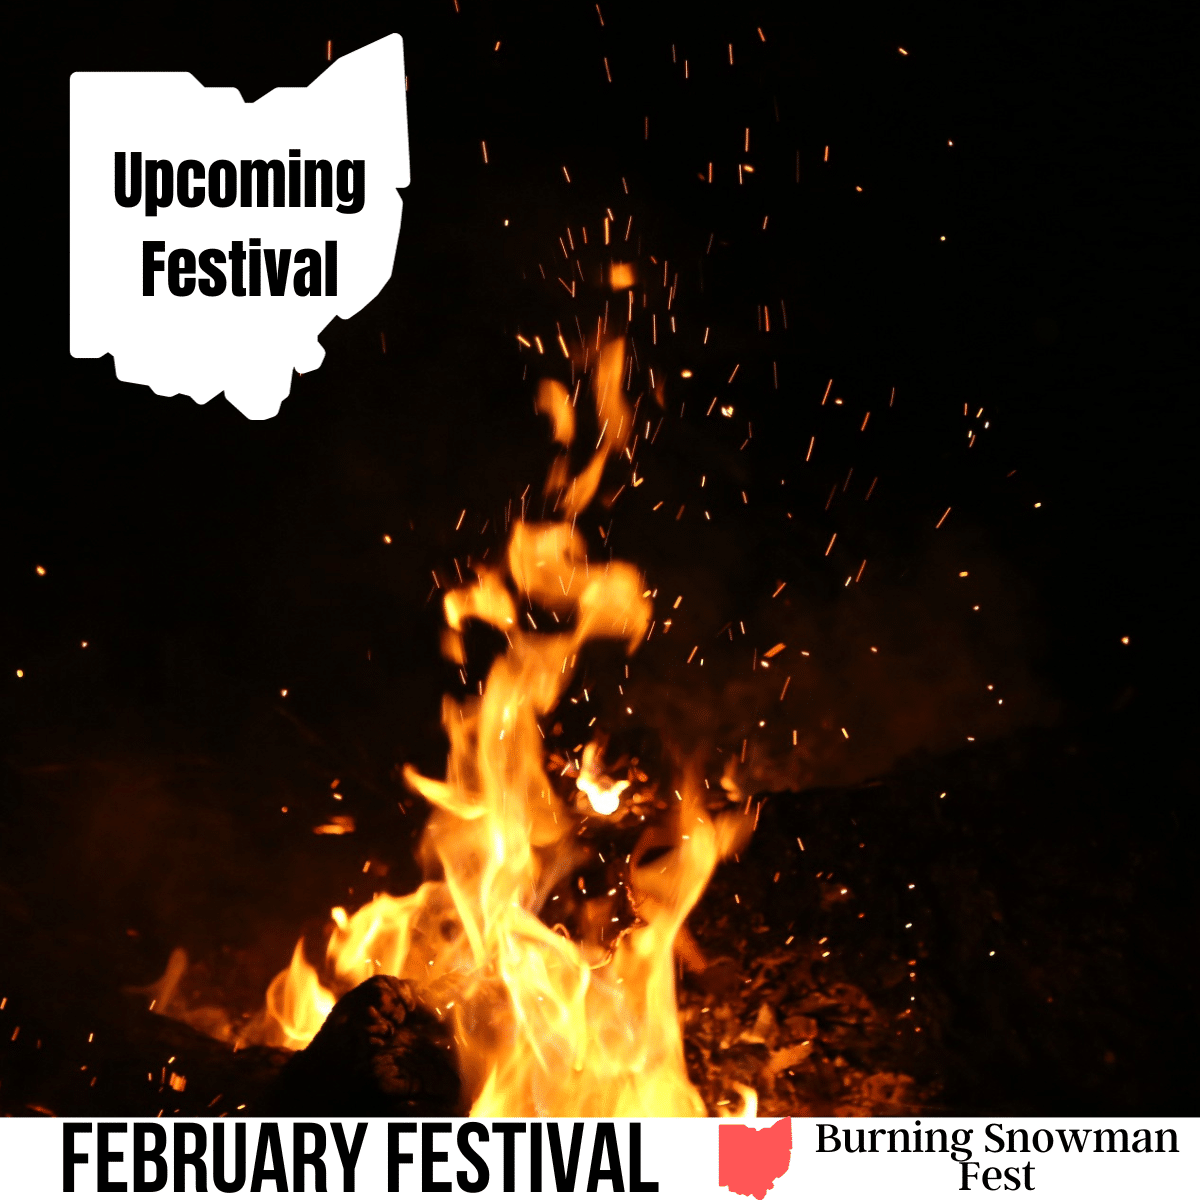 A square image with a photo of fire on a black background. White Ohio image with text Upcoming Festival in top left corner. A white strip across the bottom has text February Festival Burning Snowman Fest.